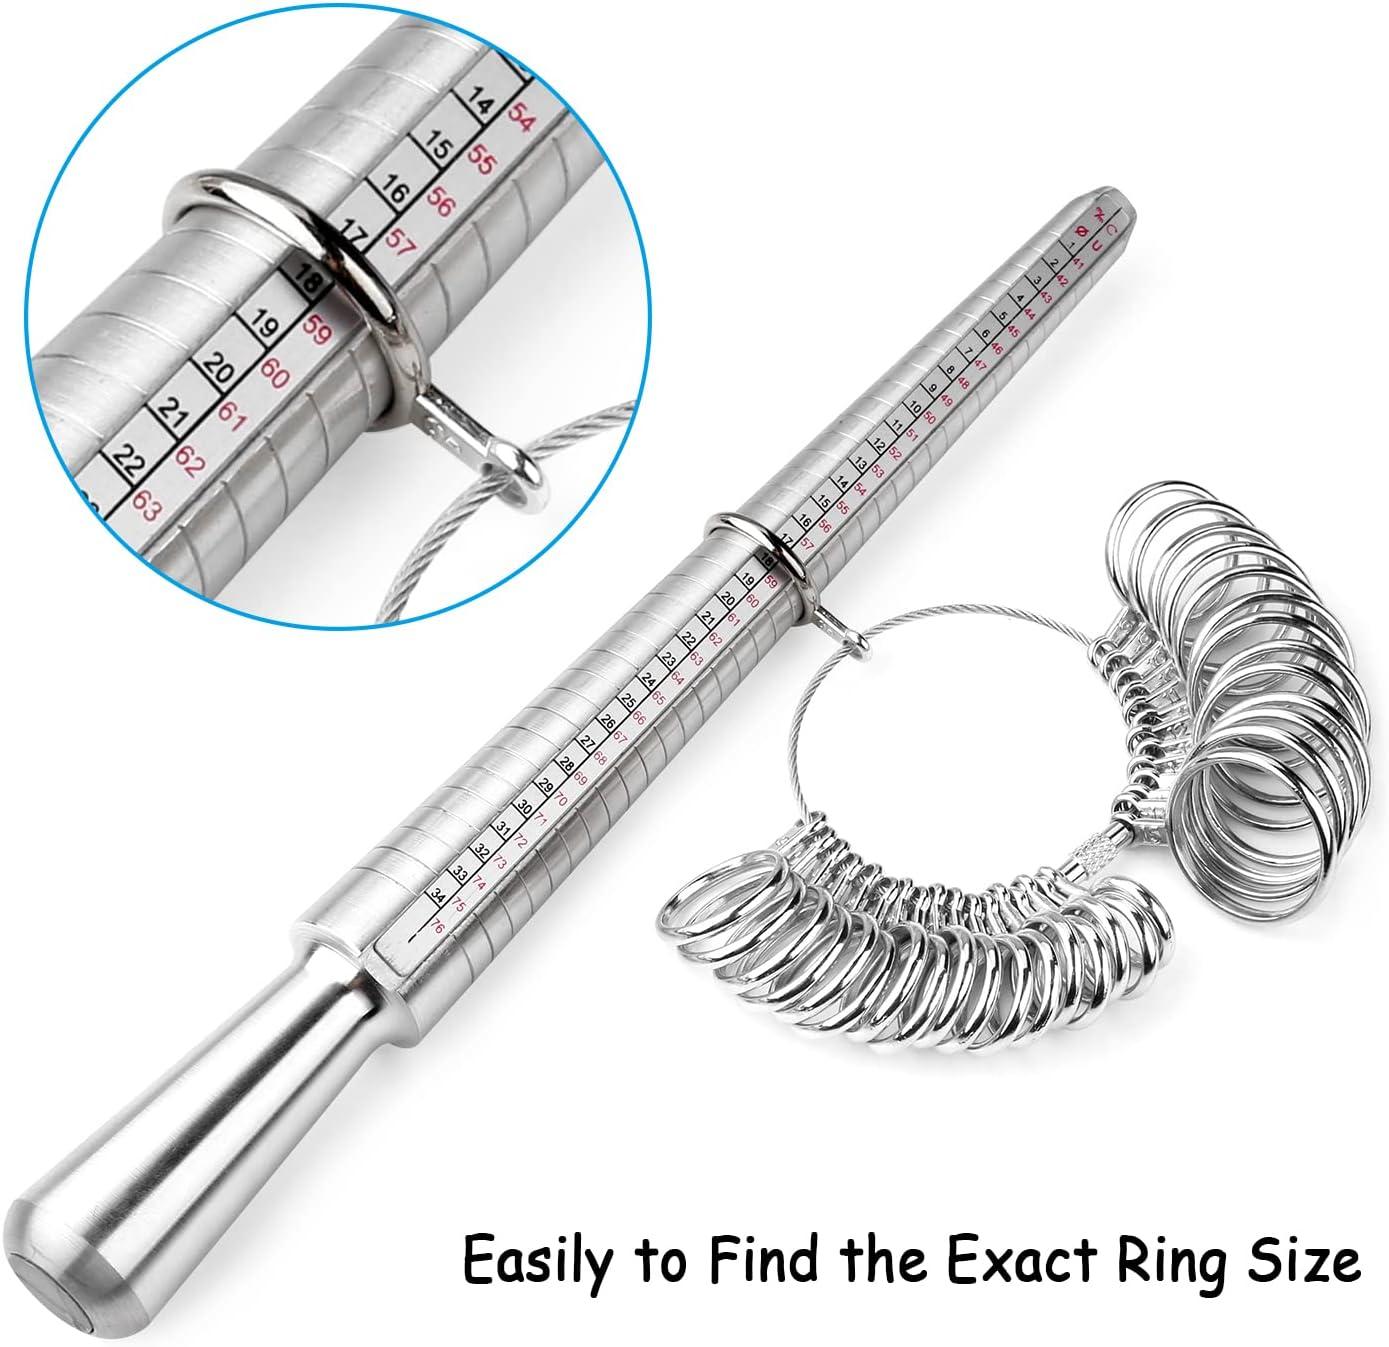 Ring mandrel true sizes (1/4 size increments) - SJ Jewelry Supply